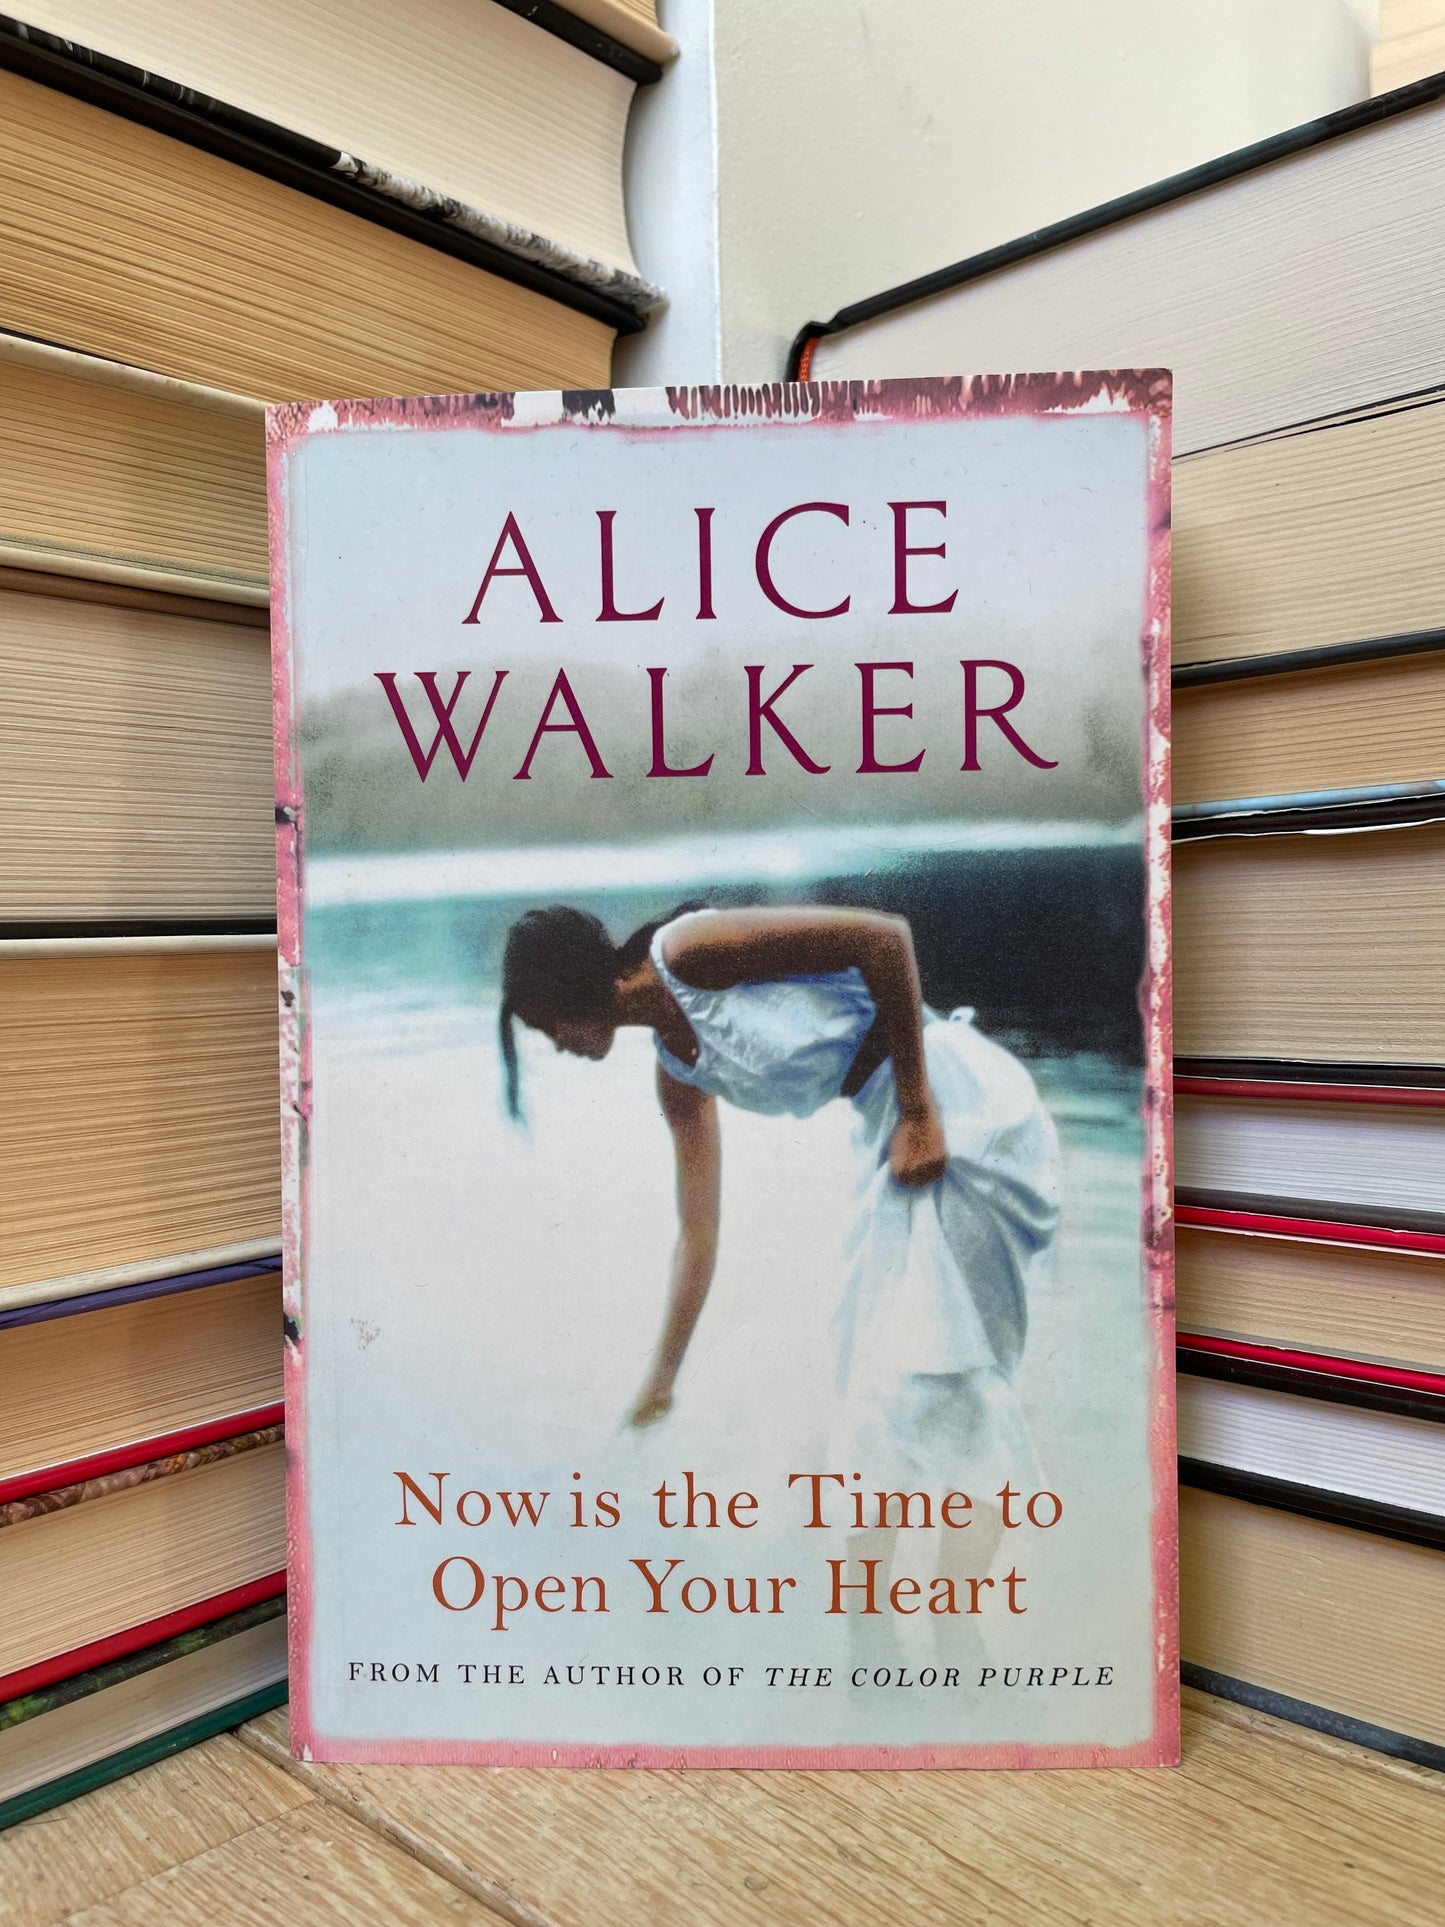 Alice Walker - Now is the Time to Open Your Heart